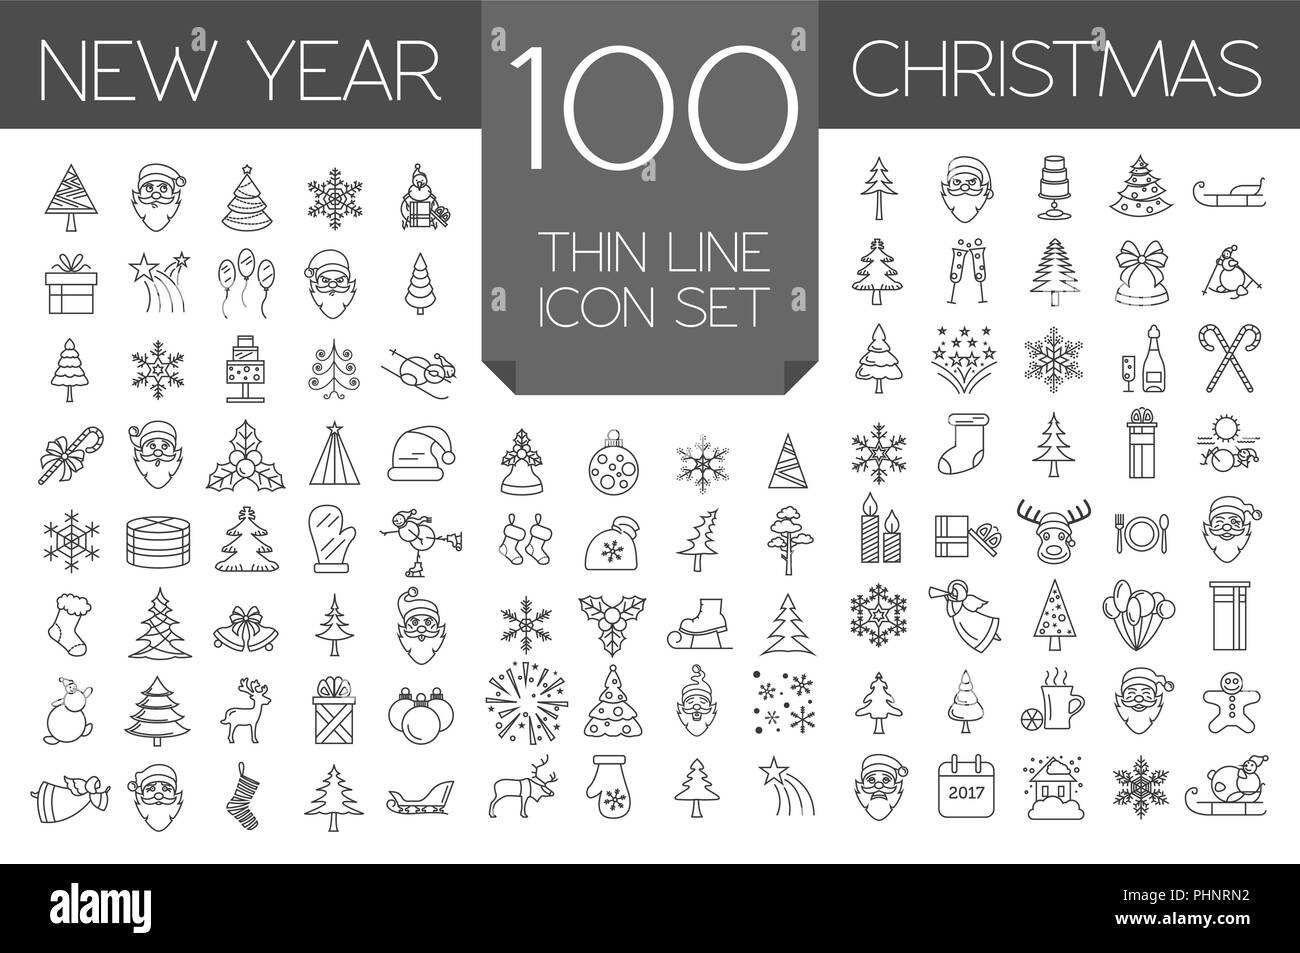 Christmas New Year Holidays Icon Big Set Thin Line Version Flat Style Collection Vector 